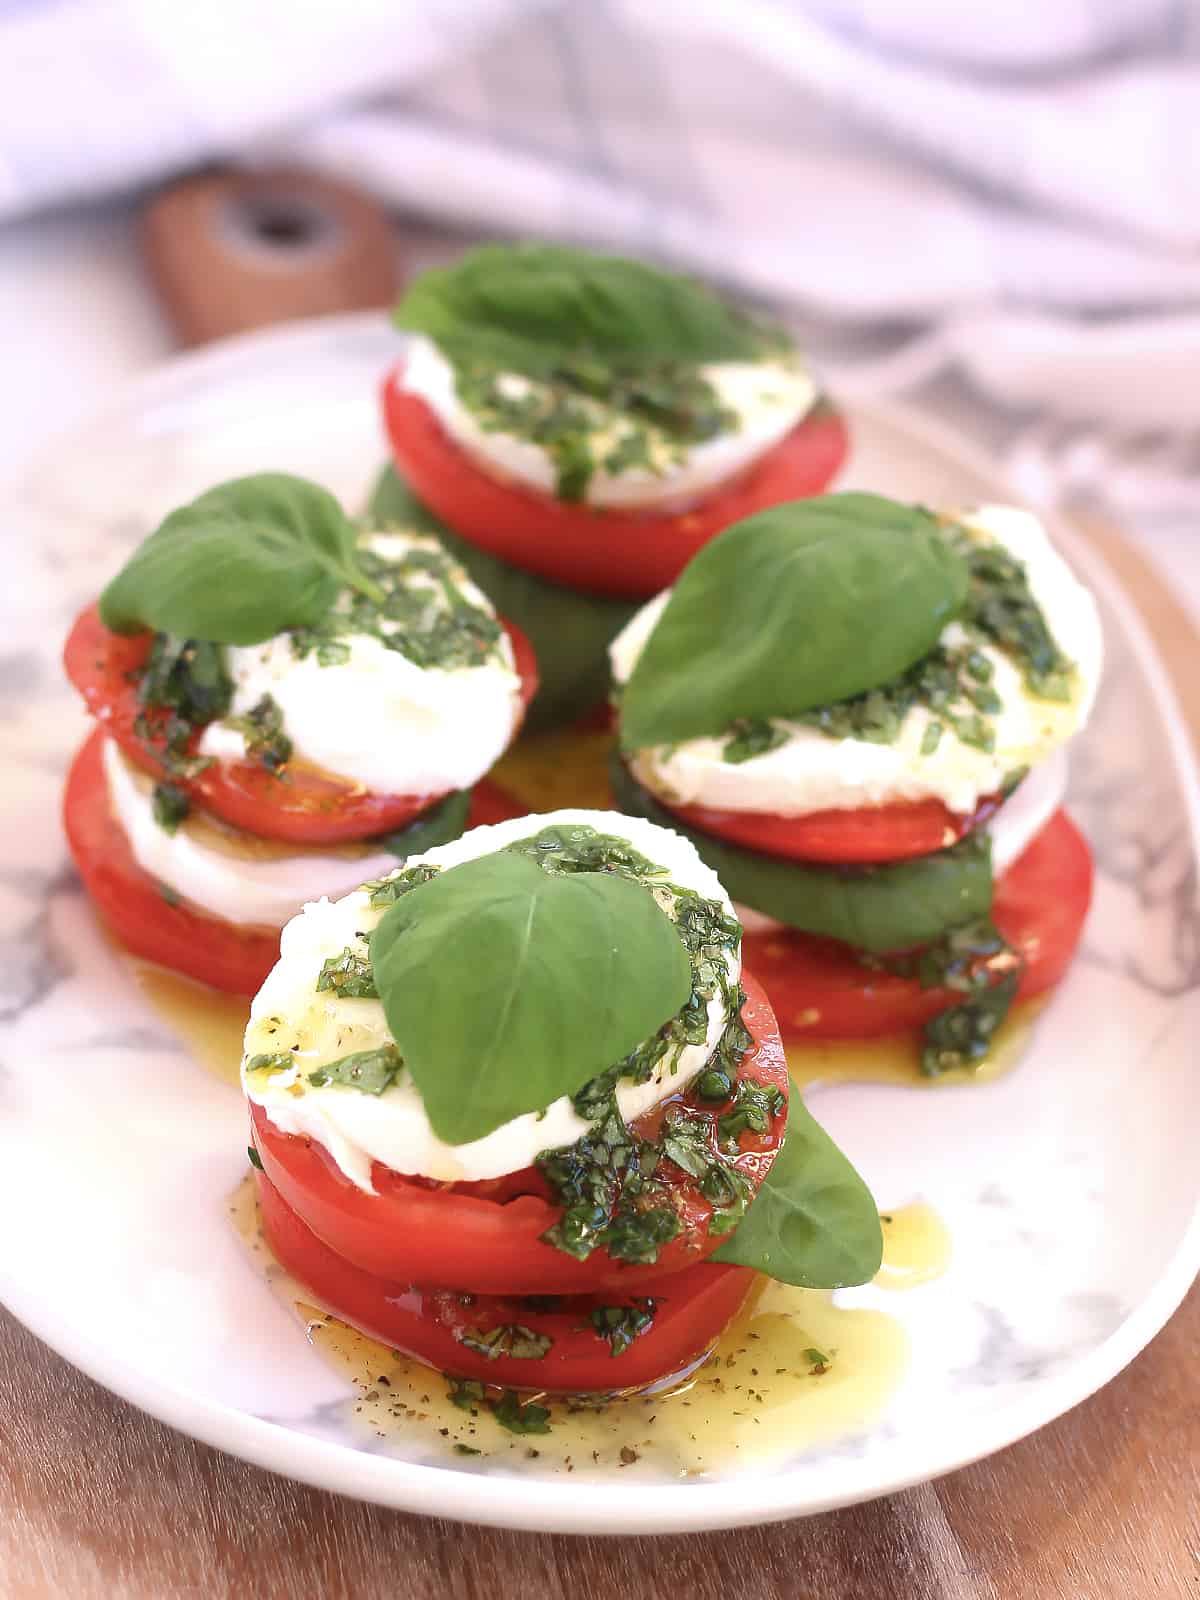 Four caprese salad stacks on a serving plate.